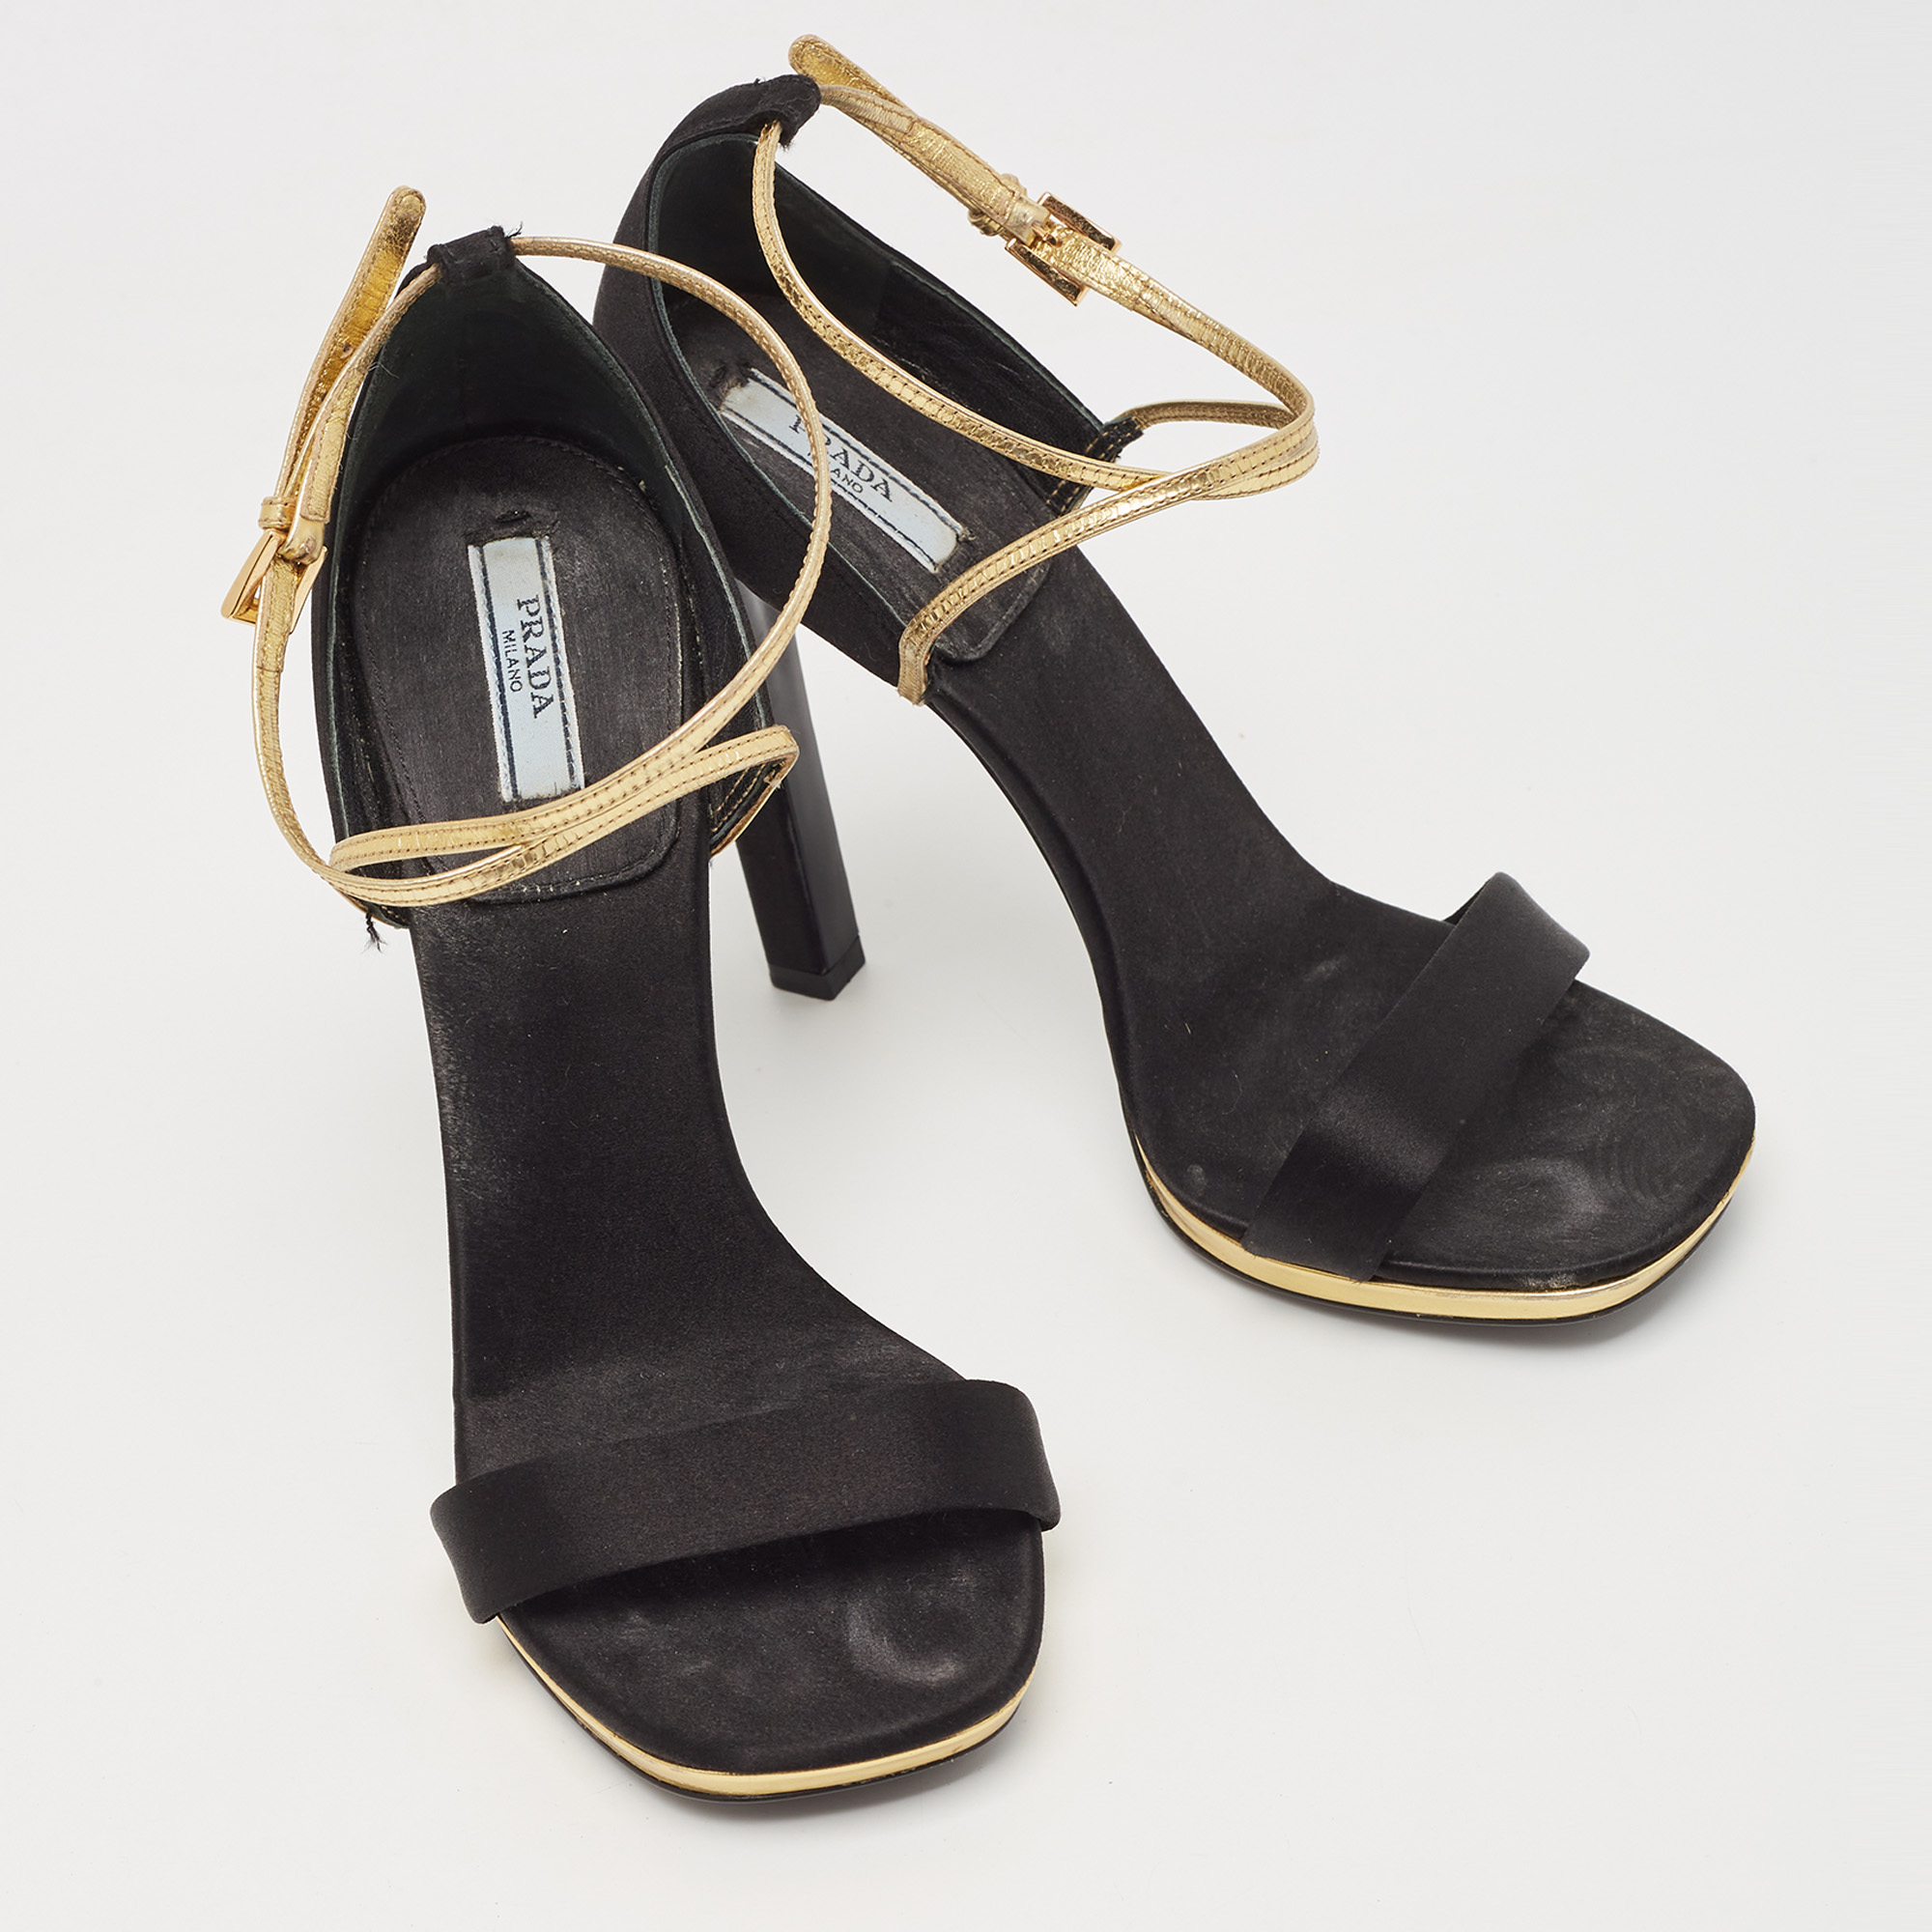 Prada Black/Gold Satin And Leather Criss Cross Ankle Strap Sandals Size 37